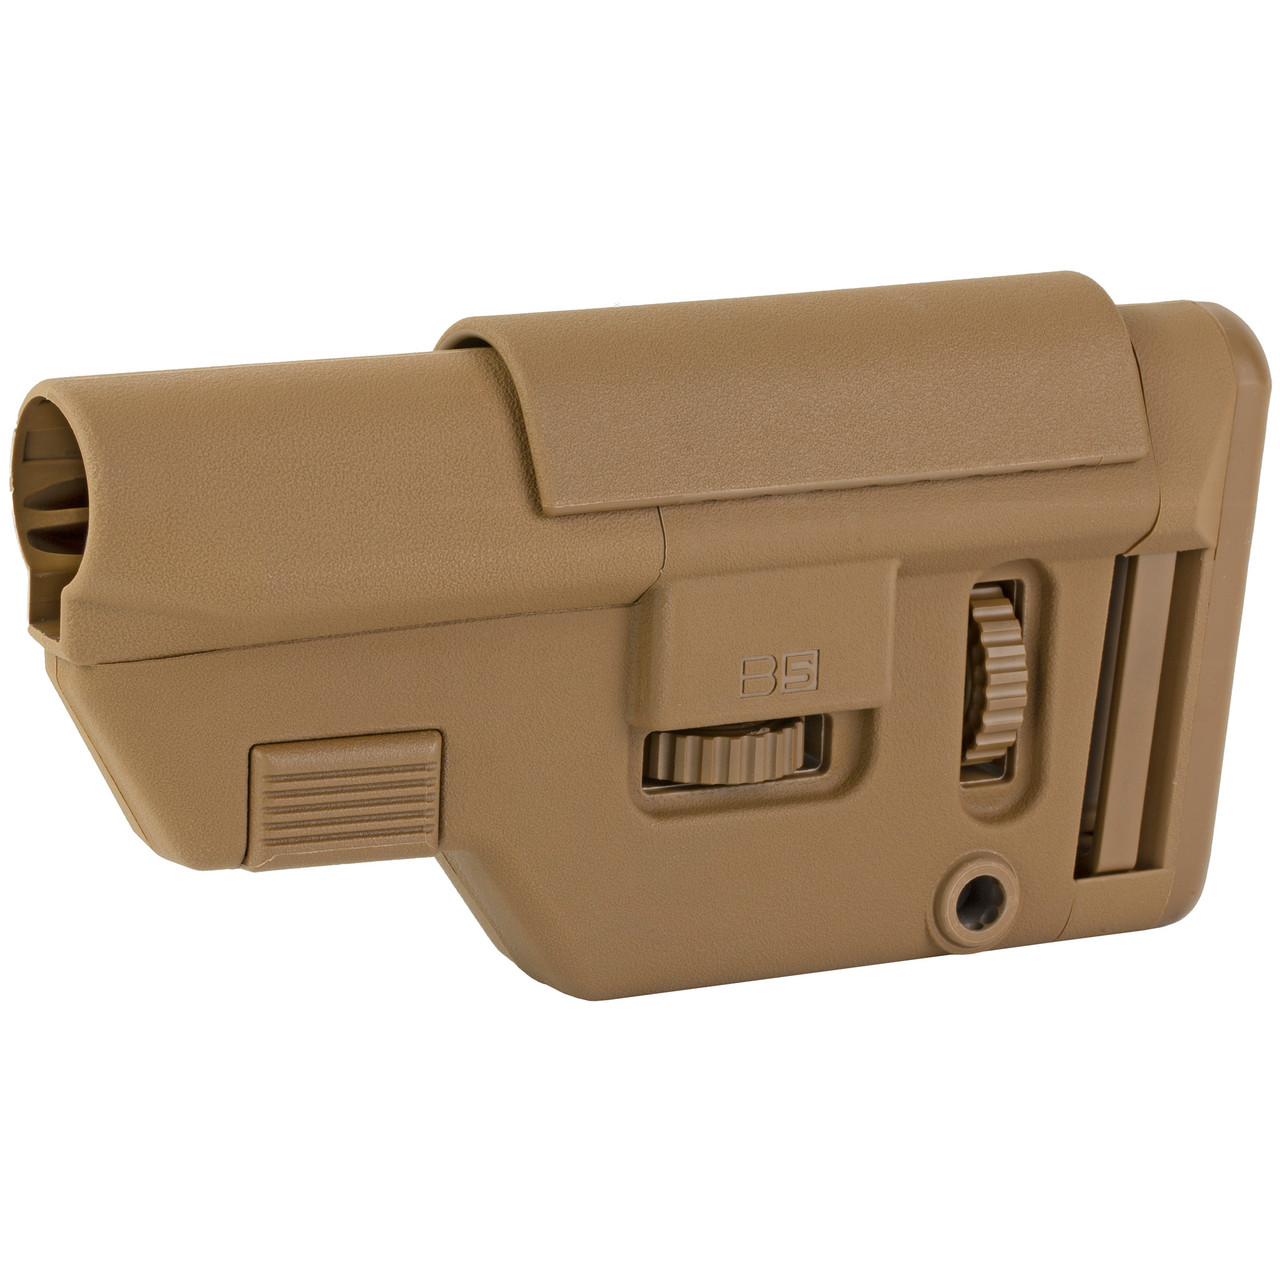 B5 Systems CPS-1306 Collapsible Prec Stk Med Cb